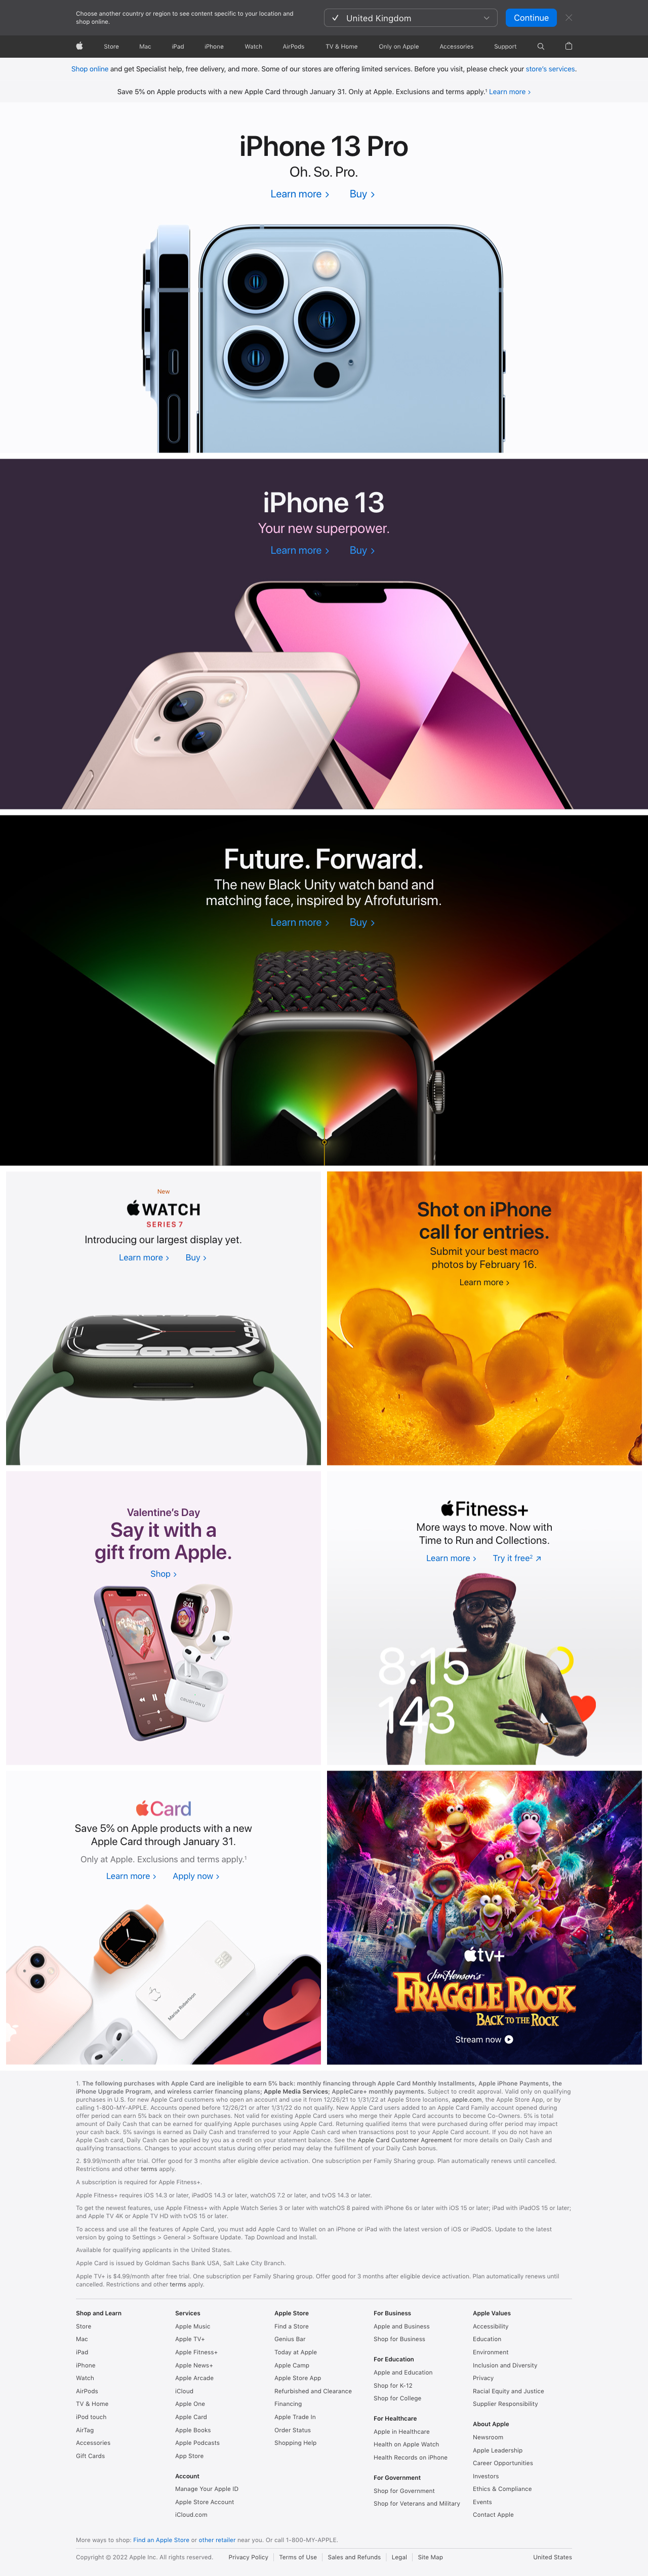 apple.com full page screenshot scrolled to bottom